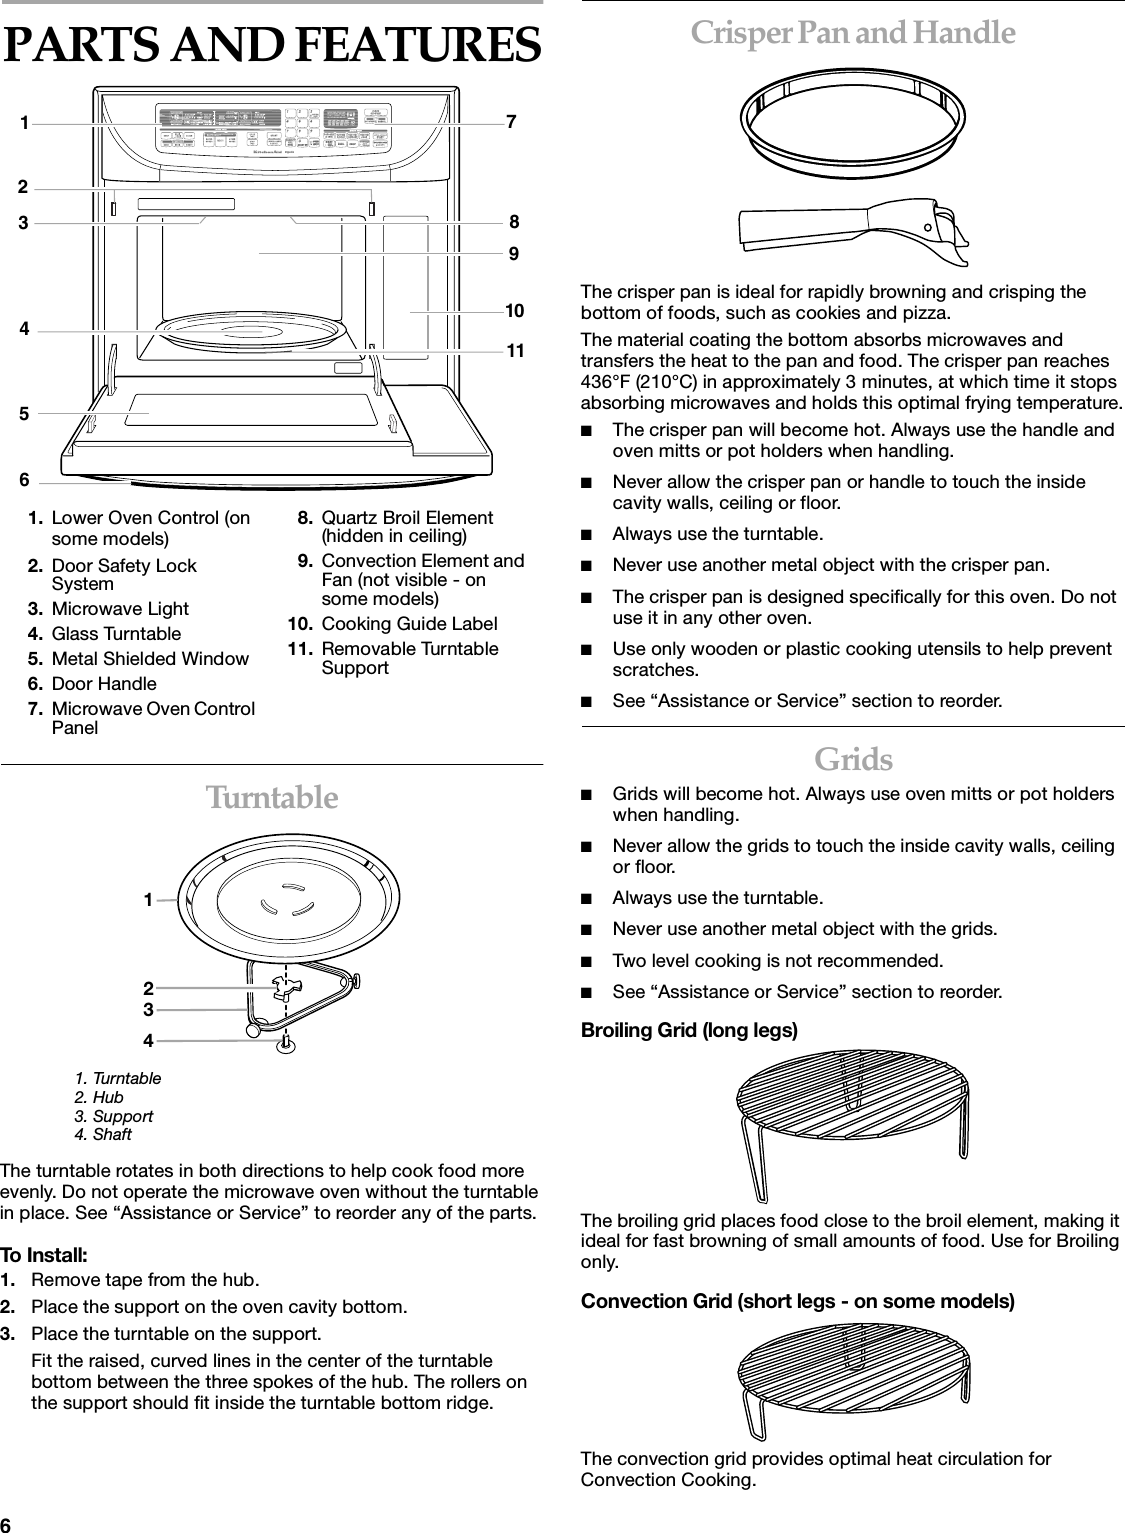 6PARTS AND FEATURESTu r nt a b l e1. Turntable2. Hub3. Support4. ShaftThe turntable rotates in both directions to help cook food more evenly. Do not operate the microwave oven without the turntable in place. See “Assistance or Service” to reorder any of the parts.To Install:1. Remove tape from the hub.2. Place the support on the oven cavity bottom.3. Place the turntable on the support.Fit the raised, curved lines in the center of the turntable bottom between the three spokes of the hub. The rollers on the support should fit inside the turntable bottom ridge.Crisper Pan and HandleThe crisper pan is ideal for rapidly browning and crisping the bottom of foods, such as cookies and pizza. The material coating the bottom absorbs microwaves and transfers the heat to the pan and food. The crisper pan reaches 436°F (210°C) in approximately 3 minutes, at which time it stops absorbing microwaves and holds this optimal frying temperature.■The crisper pan will become hot. Always use the handle and oven mitts or pot holders when handling.■Never allow the crisper pan or handle to touch the inside cavity walls, ceiling or floor. ■Always use the turntable.■Never use another metal object with the crisper pan.■The crisper pan is designed specifically for this oven. Do not use it in any other oven.■Use only wooden or plastic cooking utensils to help prevent scratches.■See “Assistance or Service” section to reorder.Grids■Grids will become hot. Always use oven mitts or pot holders when handling.■Never allow the grids to touch the inside cavity walls, ceiling or floor. ■Always use the turntable. ■Never use another metal object with the grids.■Two level cooking is not recommended.■See “Assistance or Service” section to reorder.Broiling Grid (long legs)The broiling grid places food close to the broil element, making it ideal for fast browning of small amounts of food. Use for Broiling only.Convection Grid (short legs - on some models)The convection grid provides optimal heat circulation for Convection Cooking.1. Lower Oven Control (on some models)2. Door Safety Lock System3. Microwave Light4. Glass Turntable5. Metal Shielded Window6. Door Handle7. Microwave Oven Control Panel8. Quartz Broil Element (hidden in ceiling)9. Convection Element and Fan (not visible - on some models)10. Cooking Guide Label11. Removable Turntable SupportCONVECTFULLMEAL BROIL CRISP CONVECTQUICKQUICKPREHEAPREHEATENTER TEMP CRISP COOKAUTOSENSOR DEFROST?START REHEATPTIMERHR 132 LBS MIN NO. SECIN.OZPWRCONVERSION34582169101171234